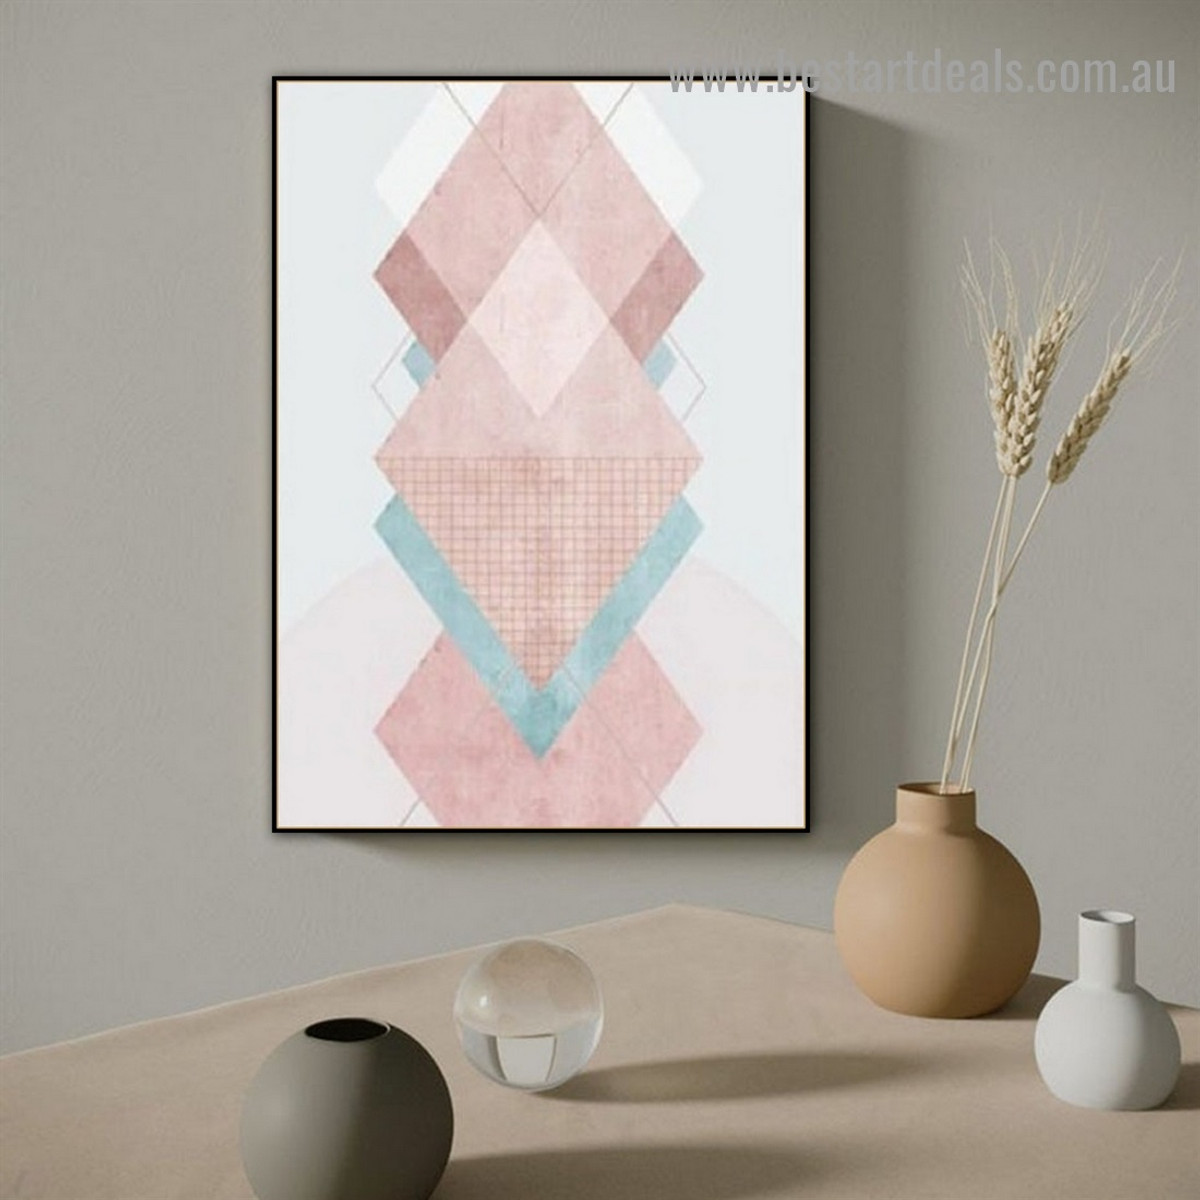 Geometric Triangle Abstract Modern Framed Artwork Portrait Canvas Print for Room Wall Décor